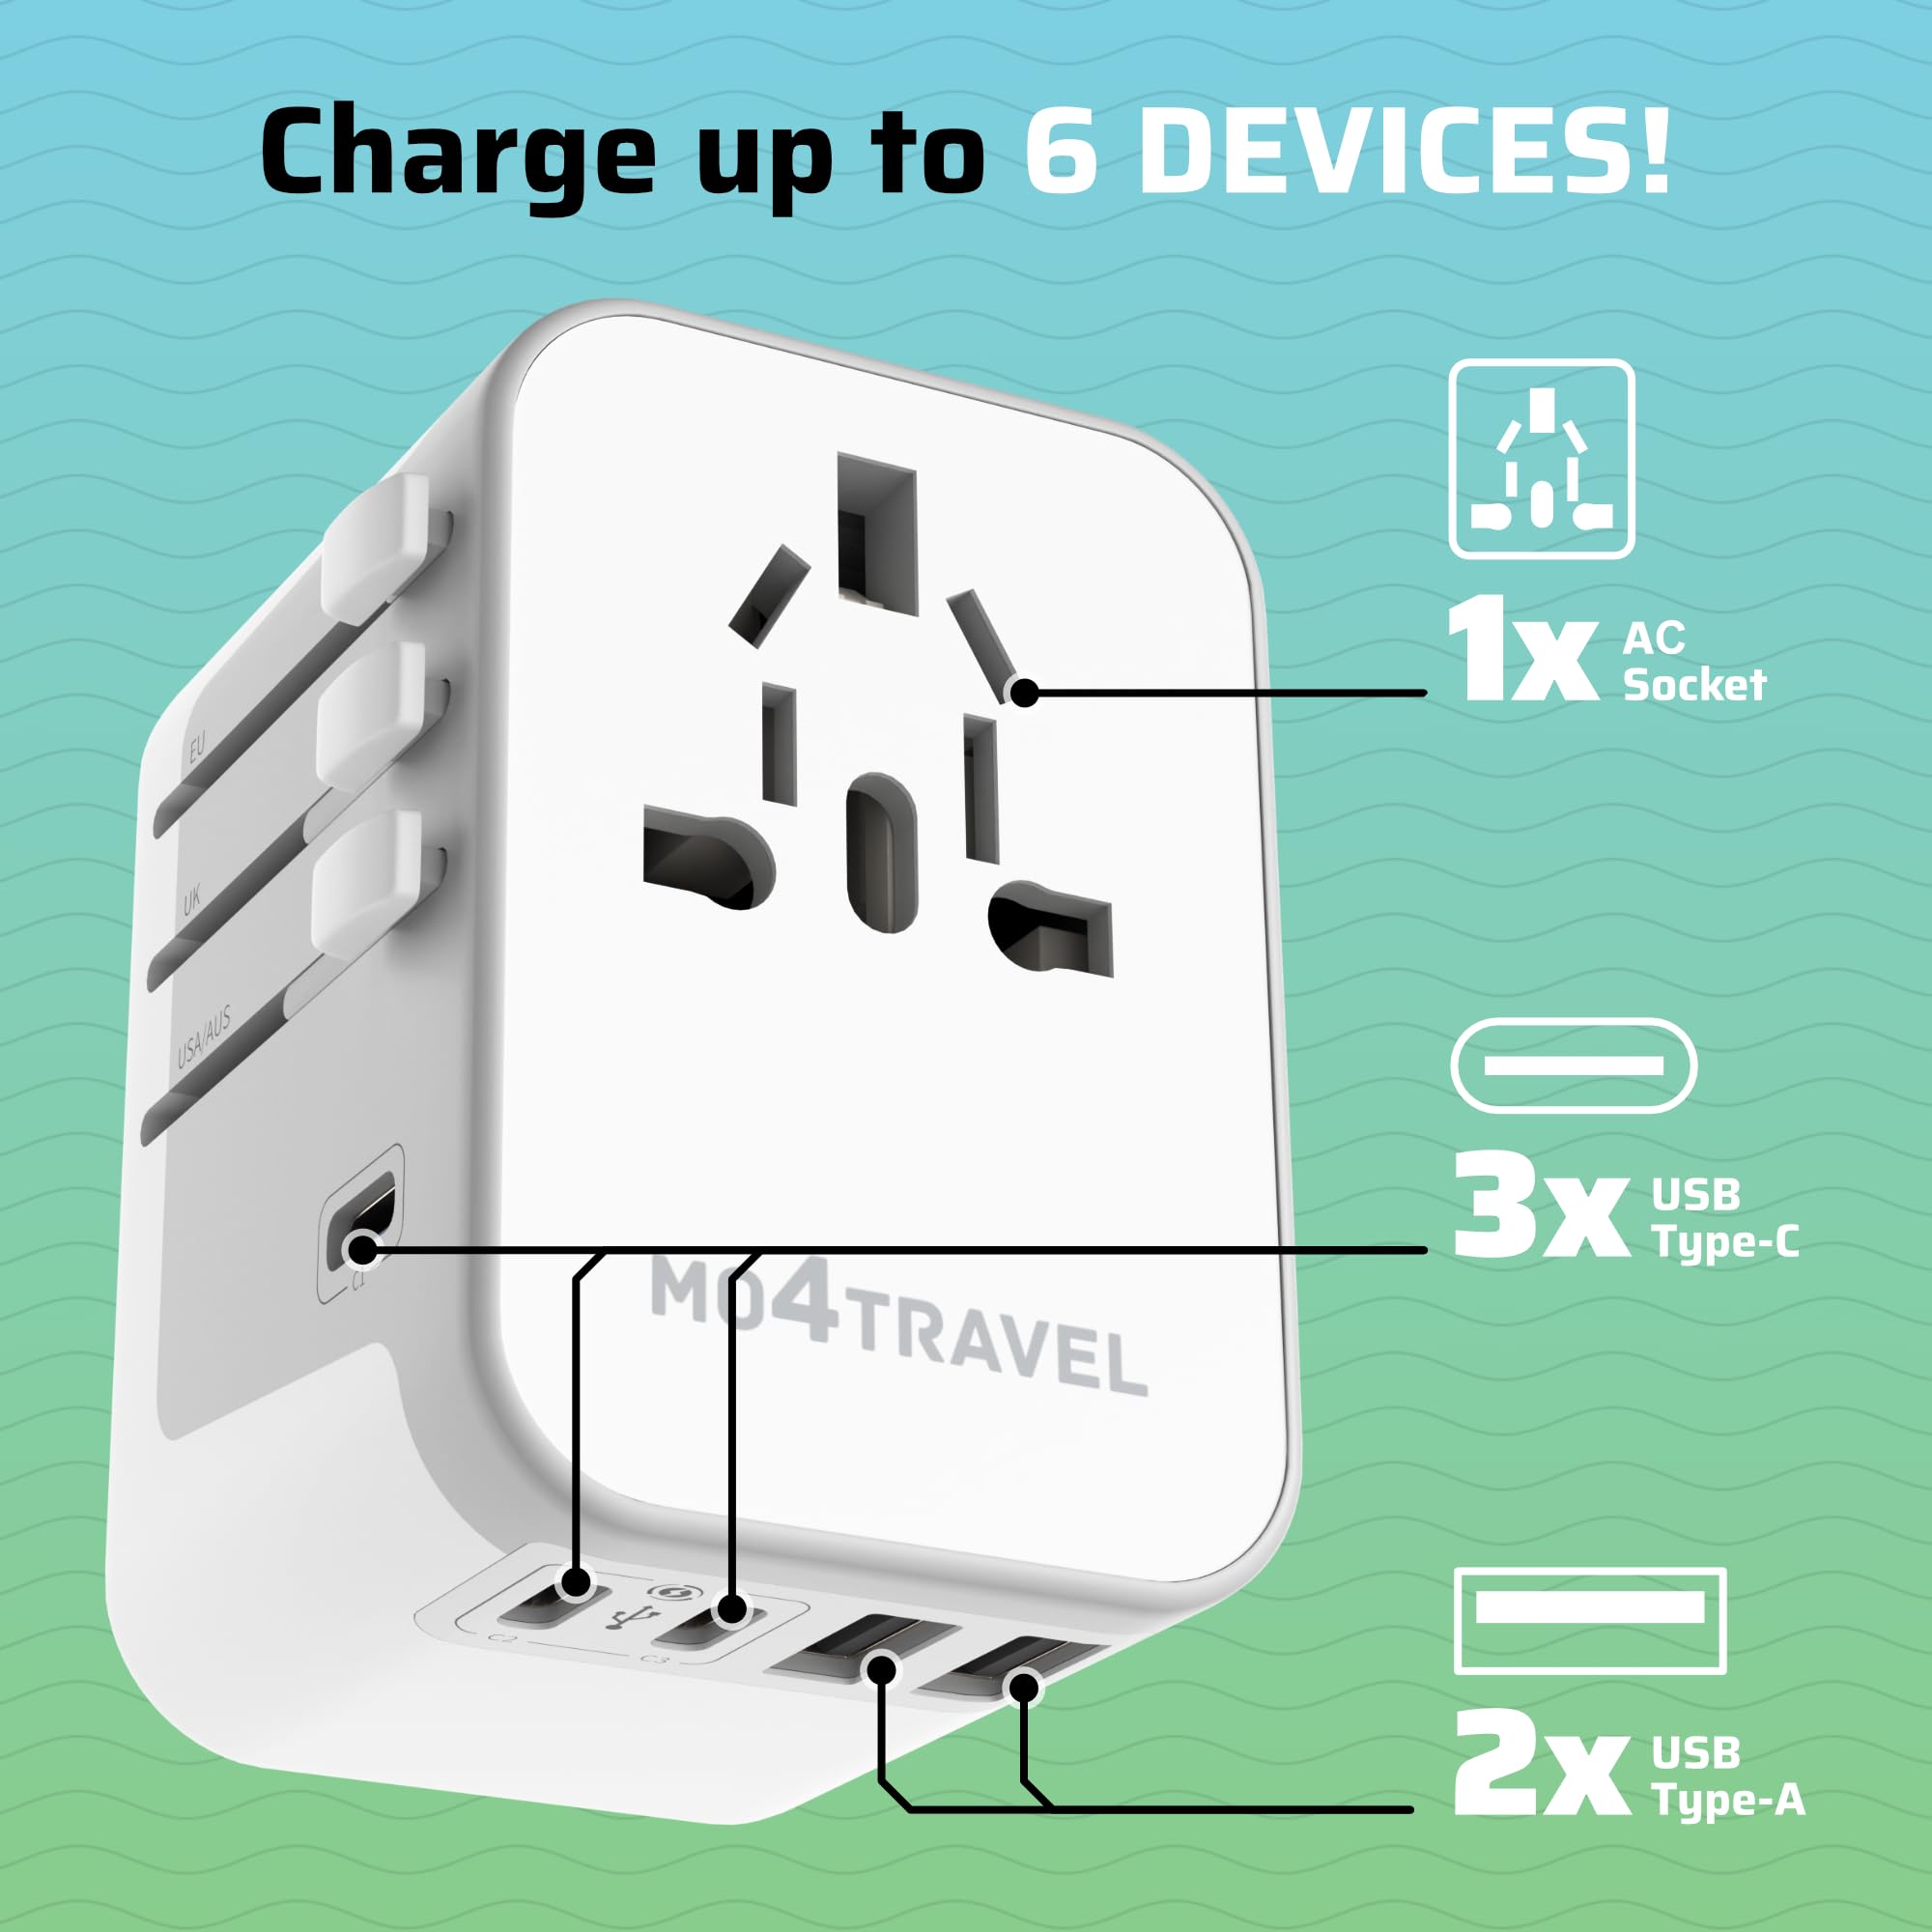 Universal Travel Adapter, International Power Plug Adapter with 4 USB-A and 1 USB-C Ports, All-in-One Worldwide Wall Charger for USA EU UK AUS and 150+ Countries